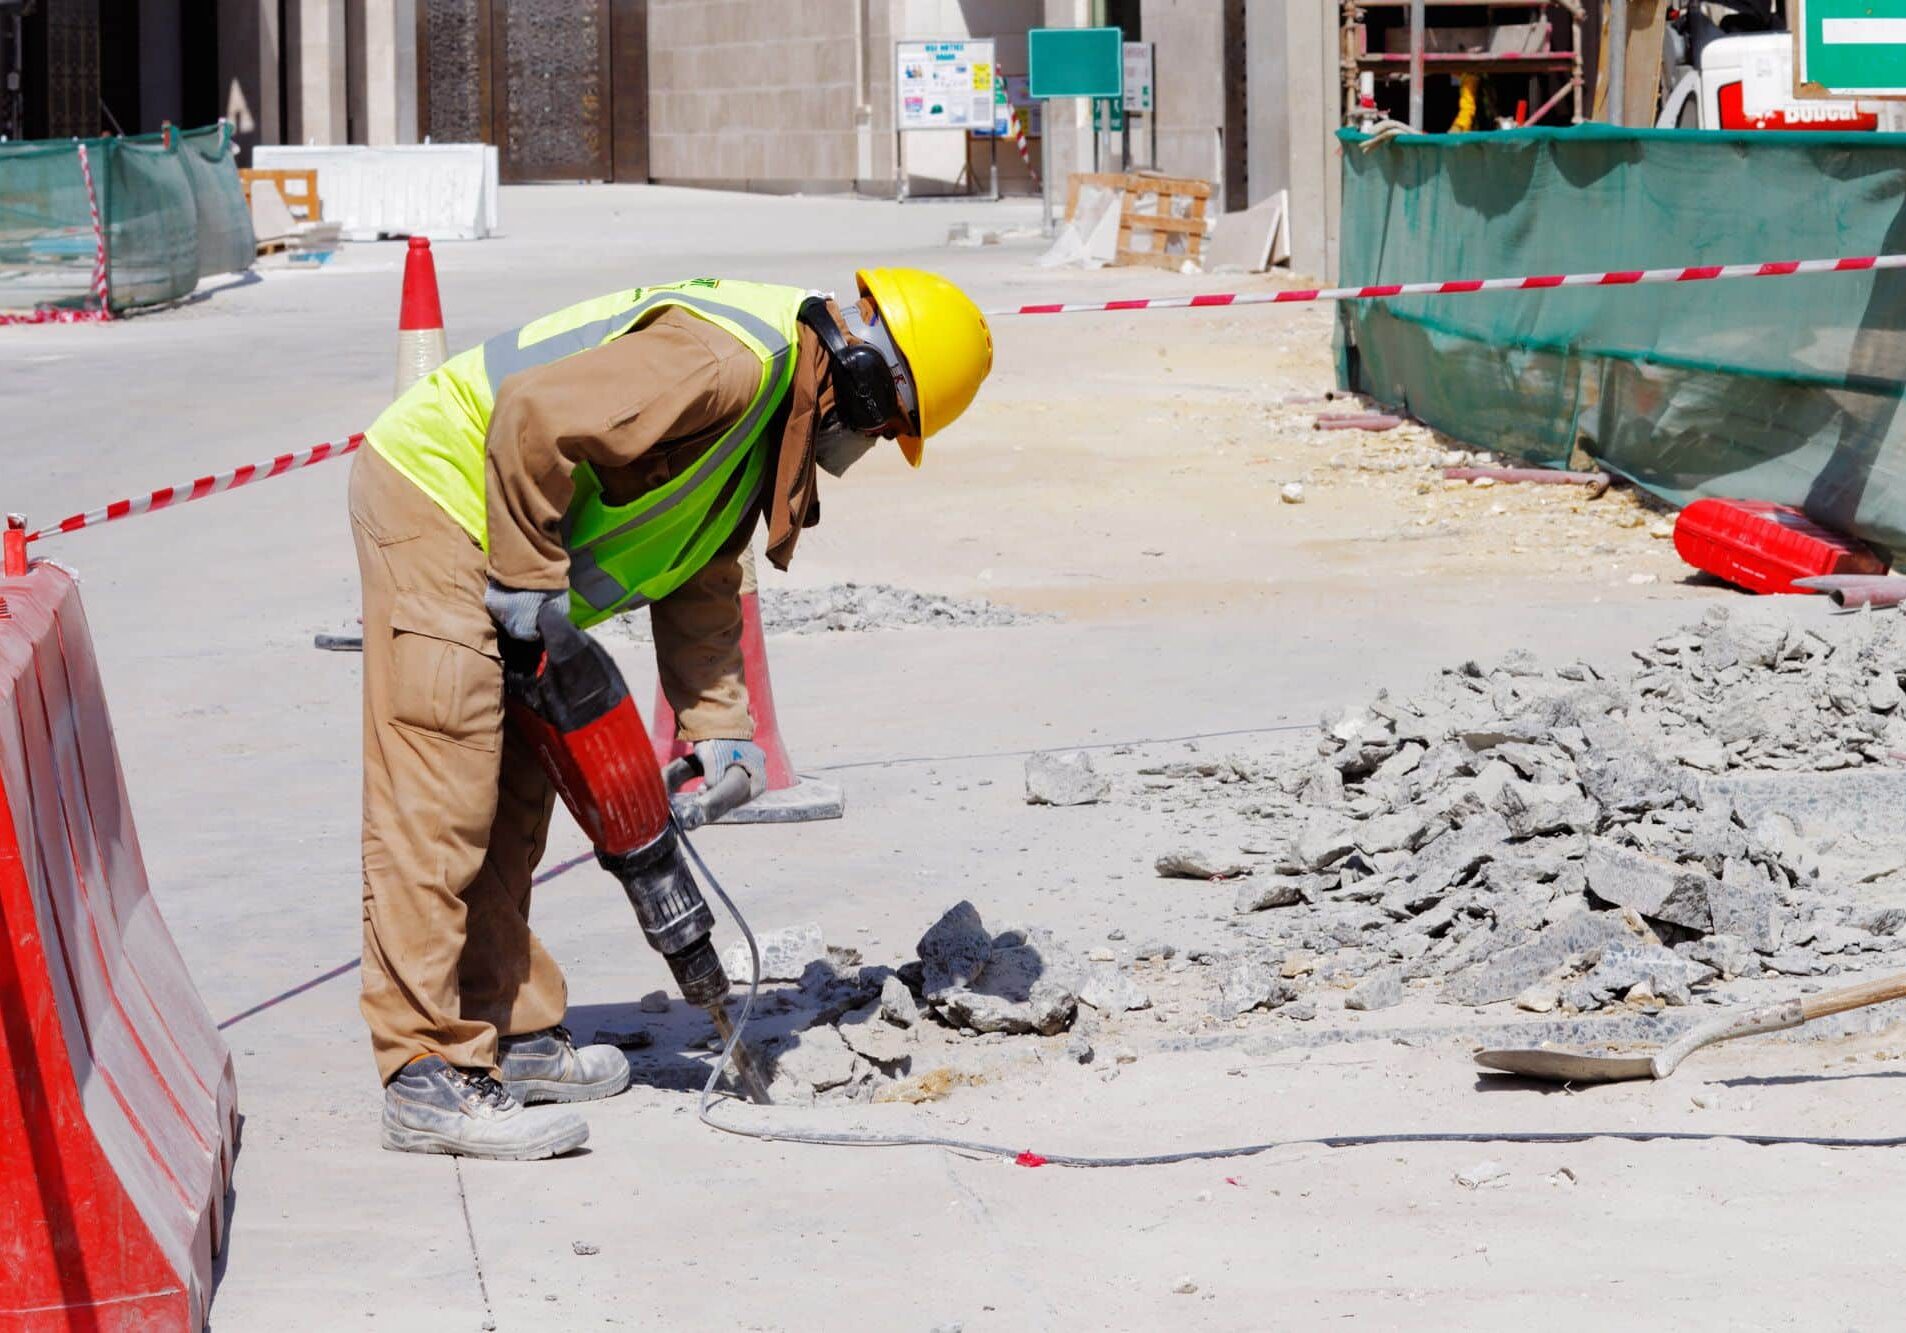 The image depicts a construction worker in a high-visibility vest and yellow hard hat using a red jackhammer to break up concrete on a construction site. There is debris scattered around the worker, indicating active work. The area is cordoned off with red and white safety barriers, and in the background, there's a green construction fence and some temporary site structures. The setting appears to be urban, with a clear sky suggesting a sunny day. The worker is focused on the task, emphasizing safety and work in progress.